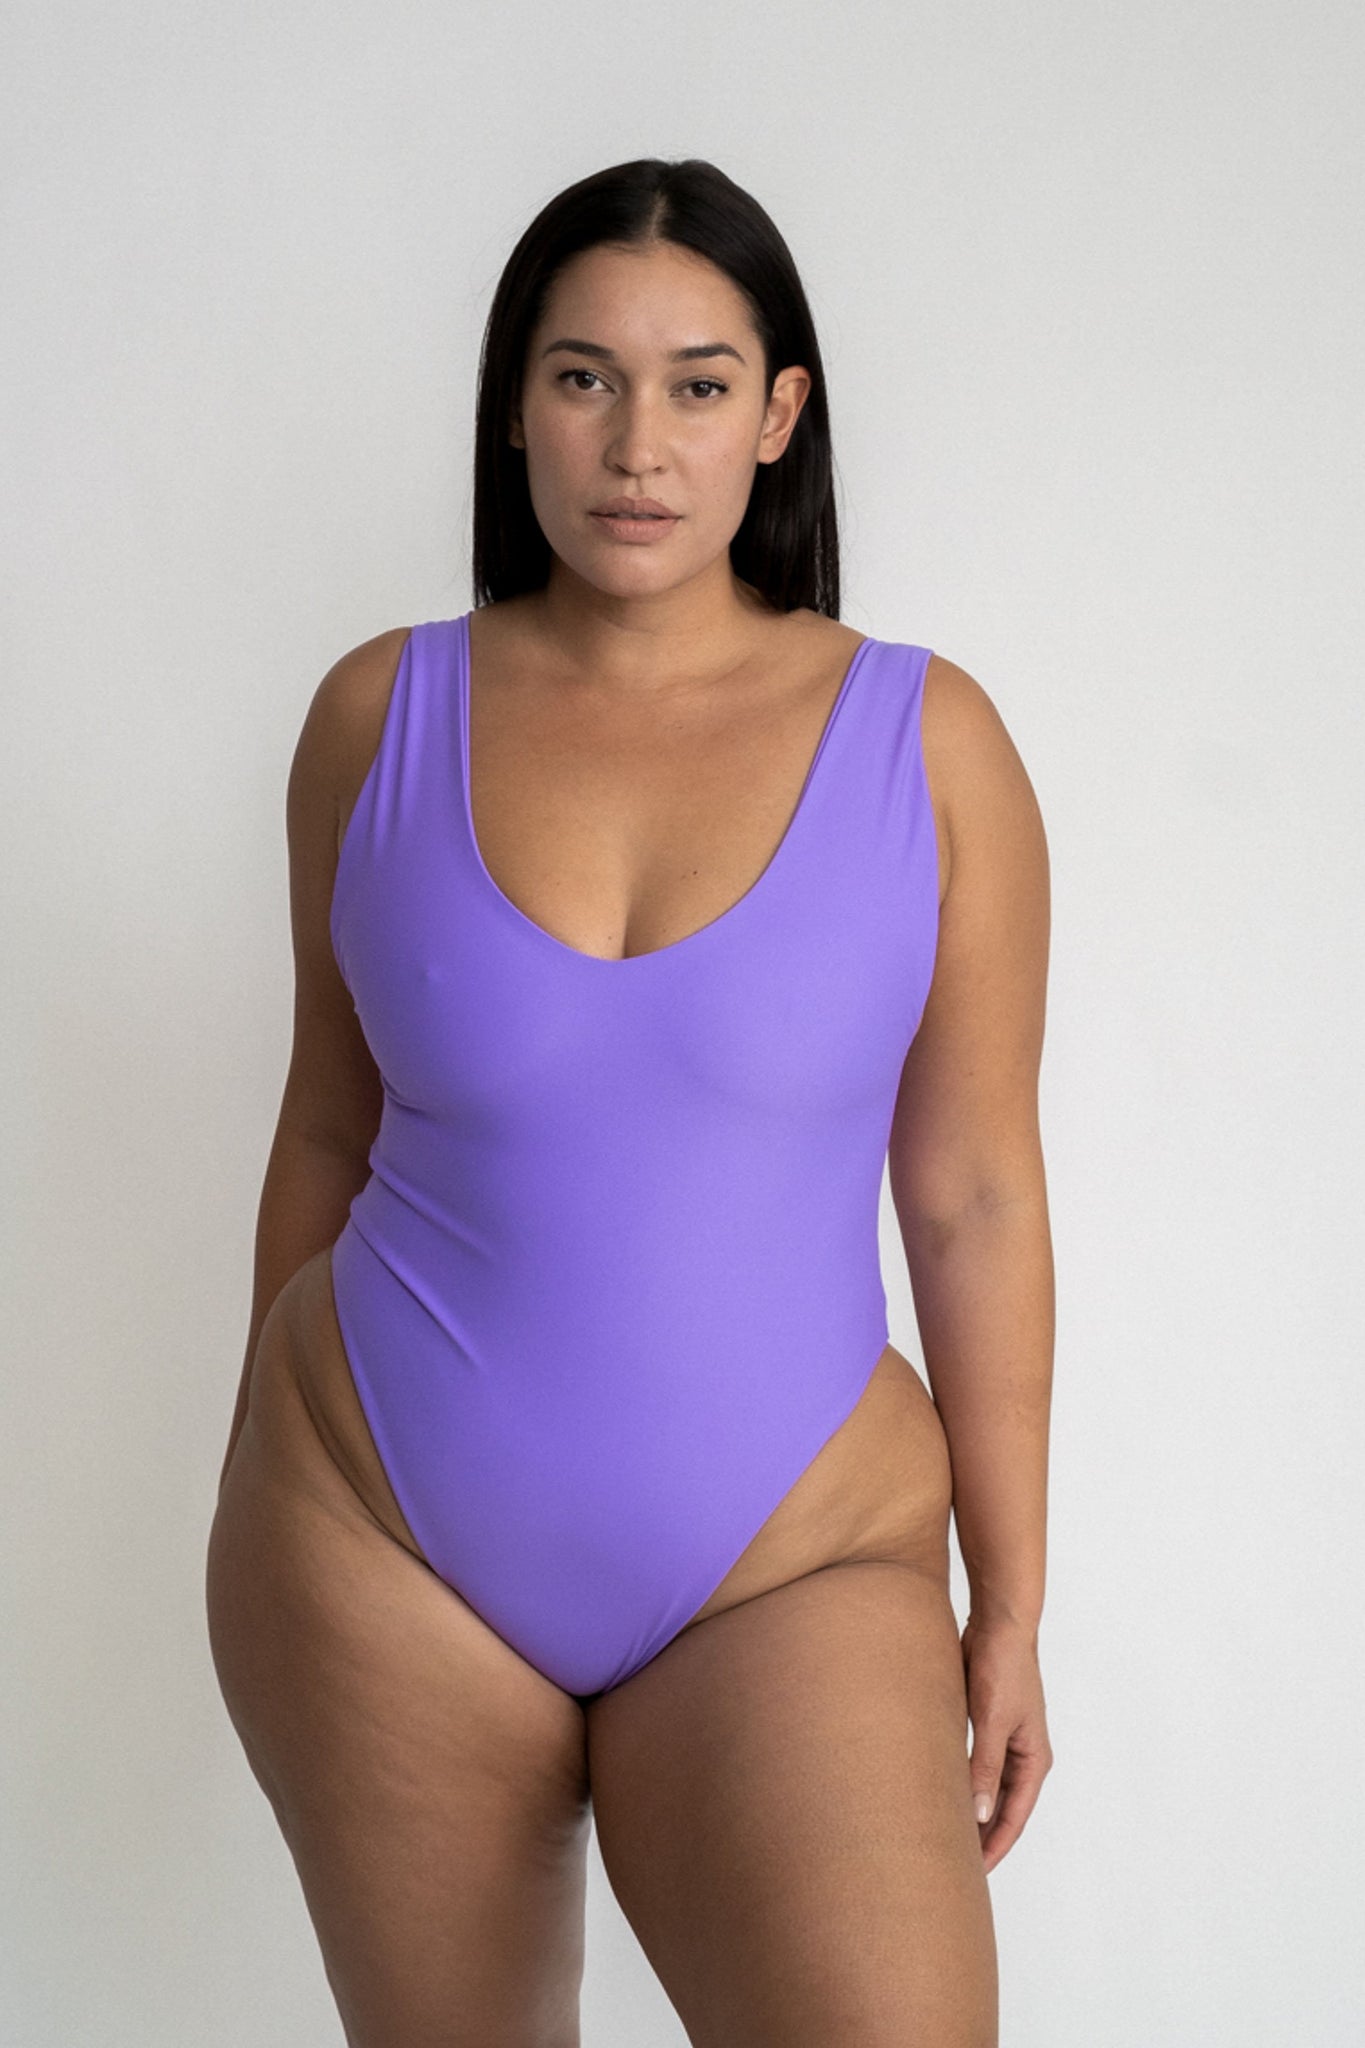 A woman standing in front of a white wall wearing a bright purple one piece swimsuit with a v neckline and minimal coverage.